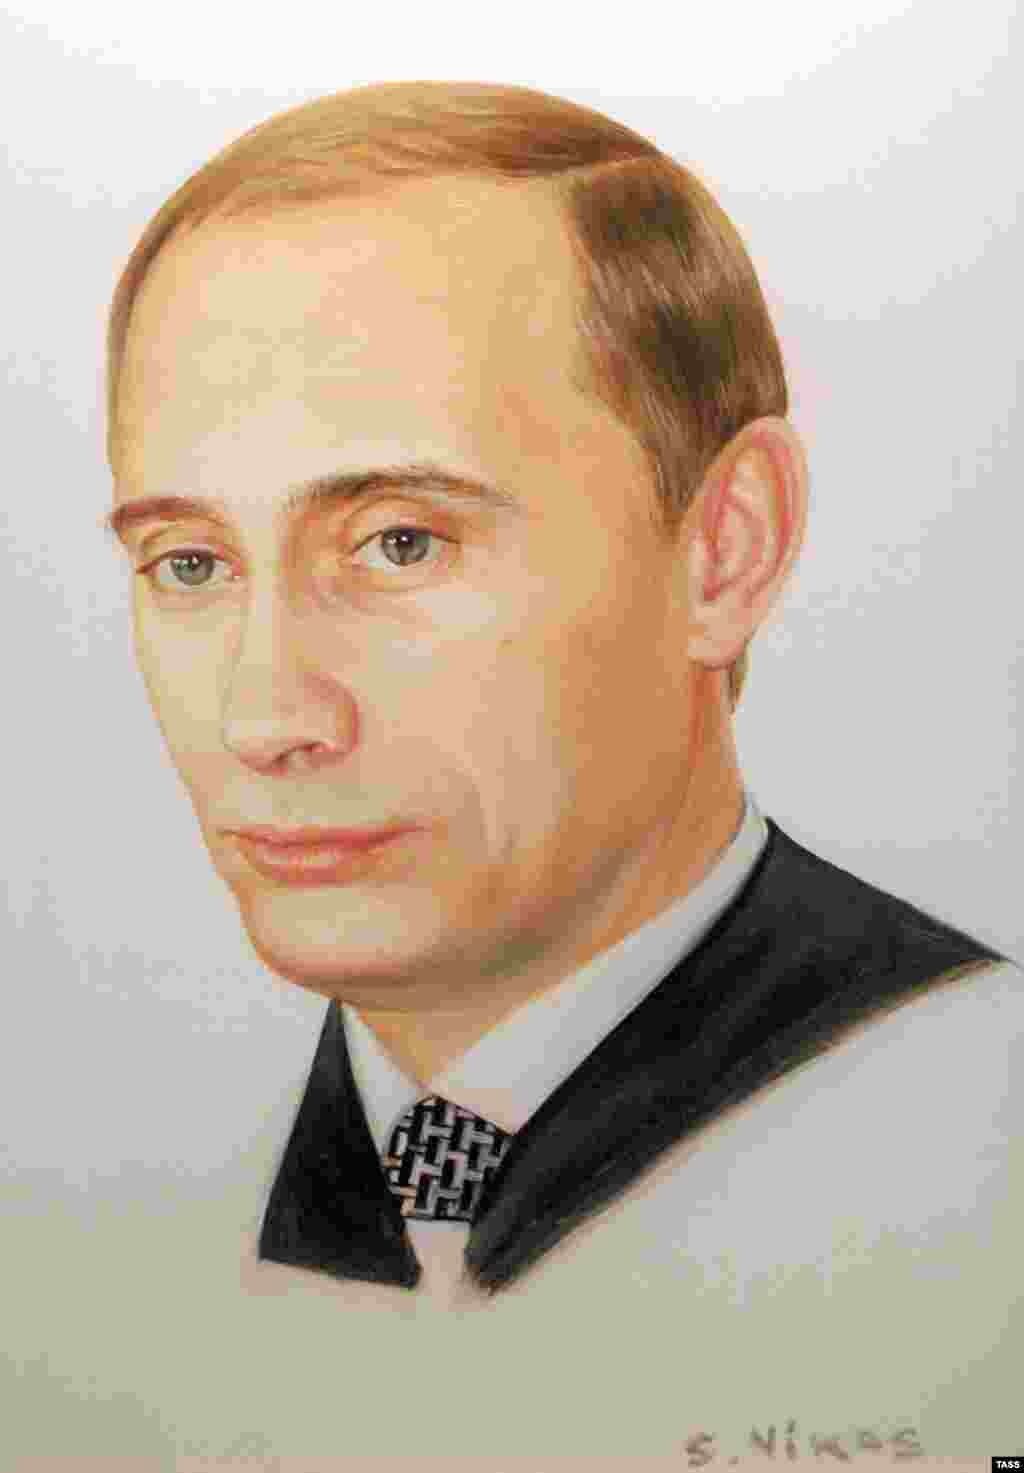 A portrait by artist Nikas Safronov at his exhibition in the Library of Foreign Literature in Moscow